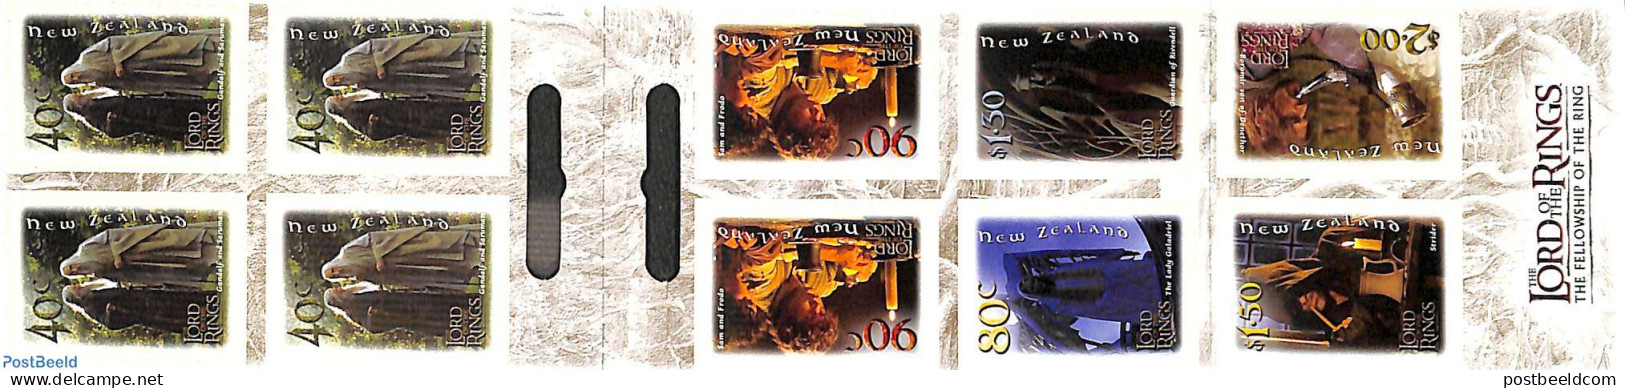 New Zealand 2001 LORD OF THE RINGS BOOKLET, Mint NH, Stamp Booklets - Art - Authors - Photography - Science Fiction - Nuovi